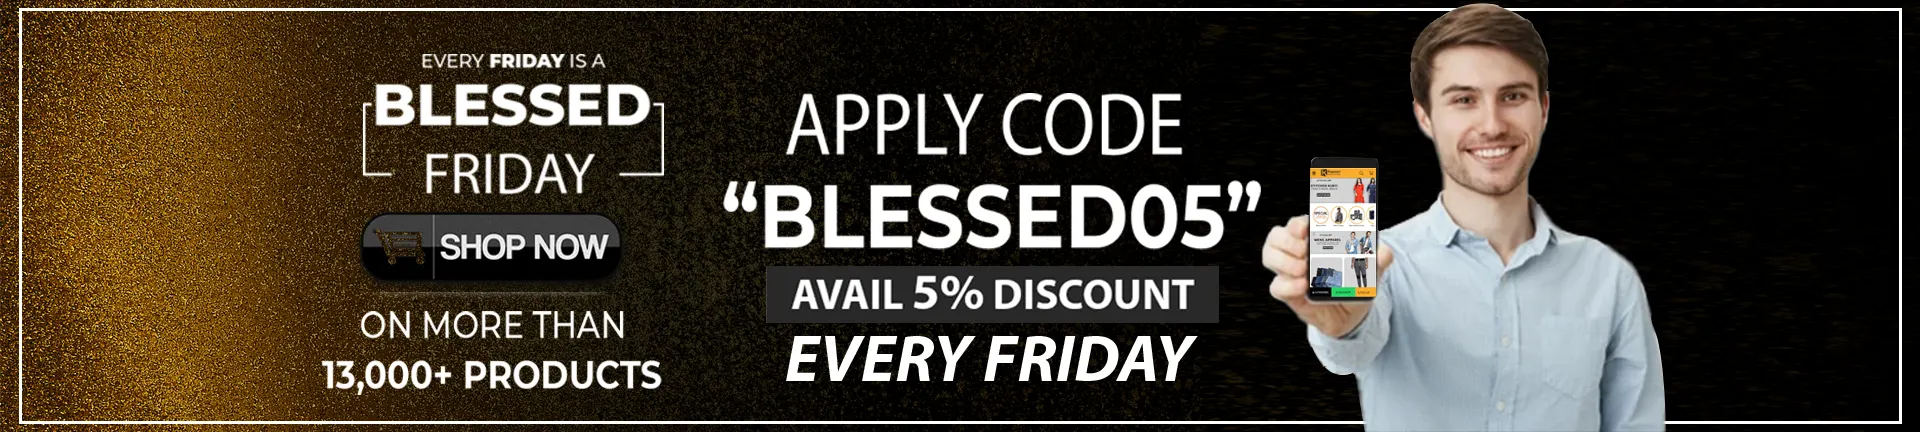 Every Friday is Blessed, we like to share discount of 5% to every one - Kayazar